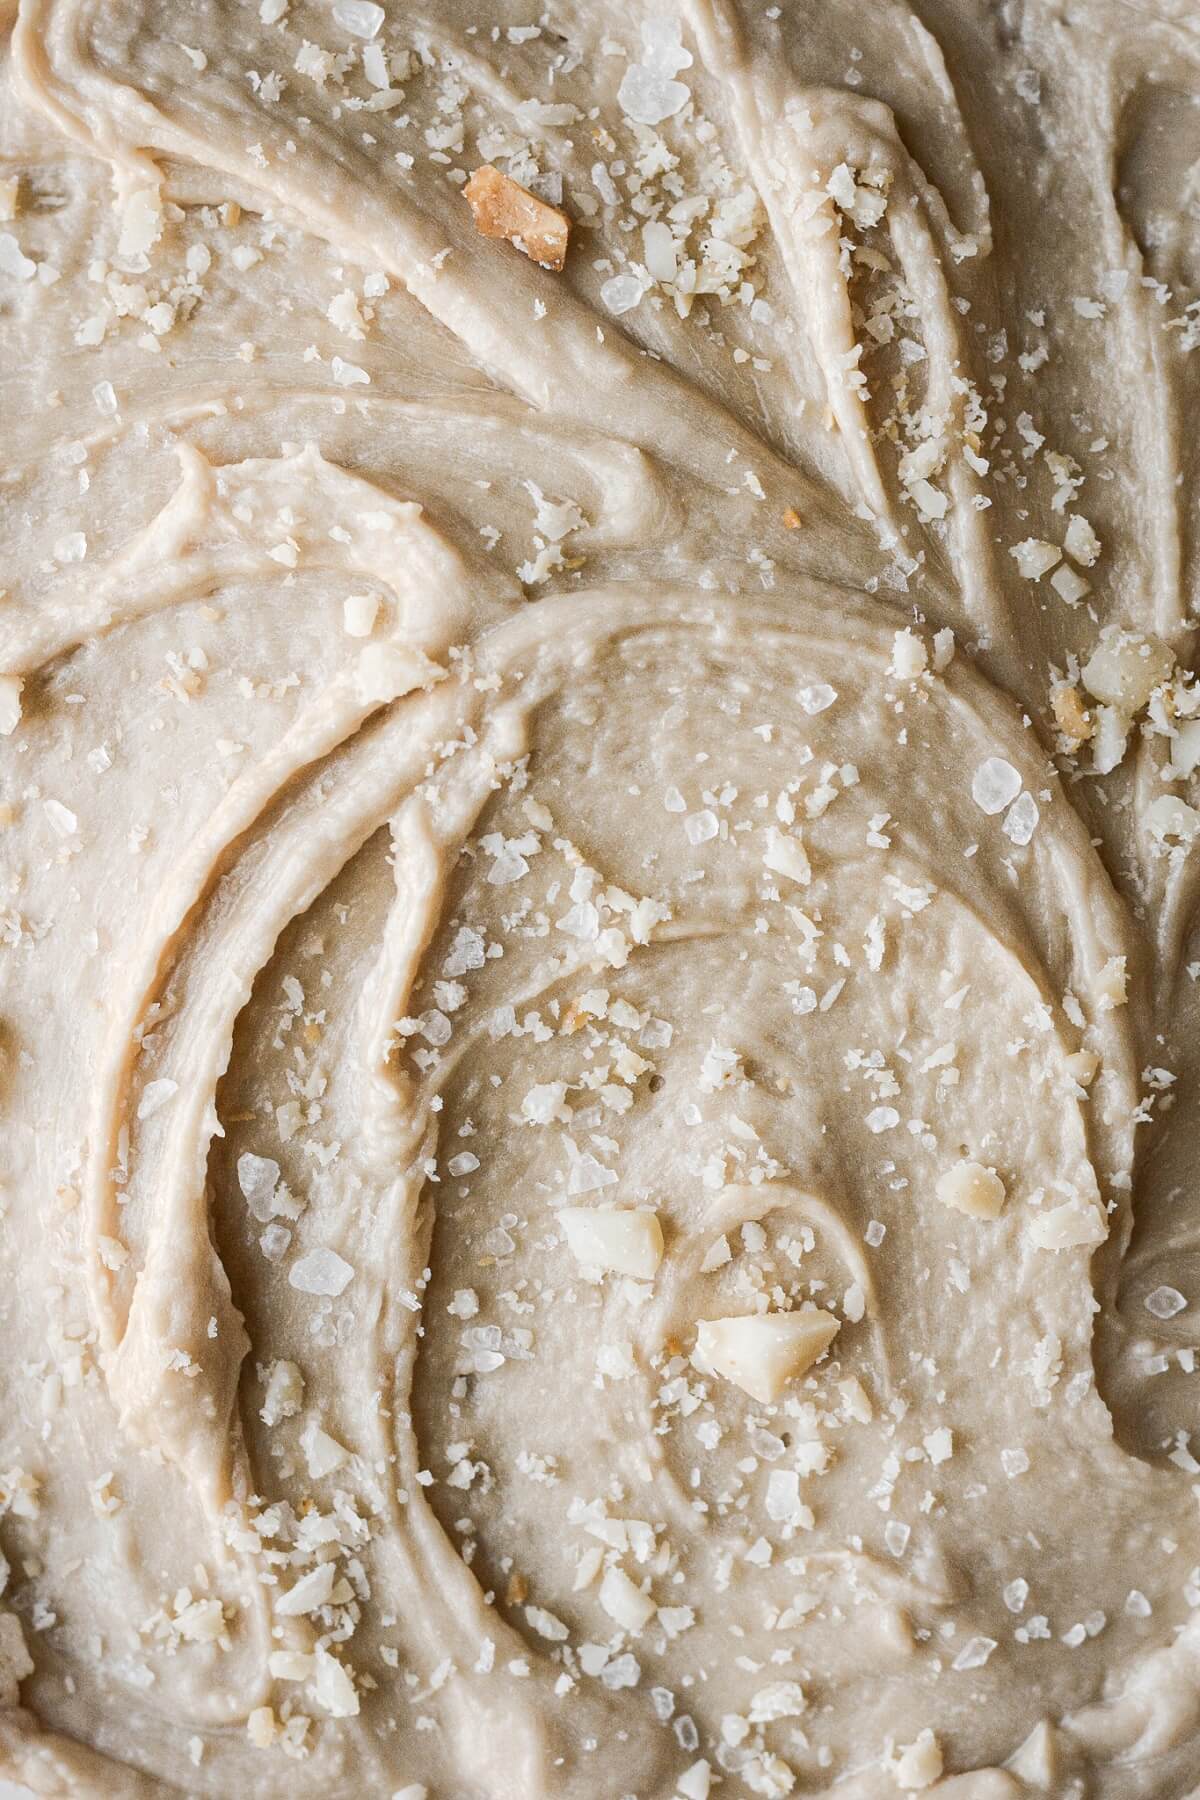 Penuche frosting with chopped macadamia nuts.